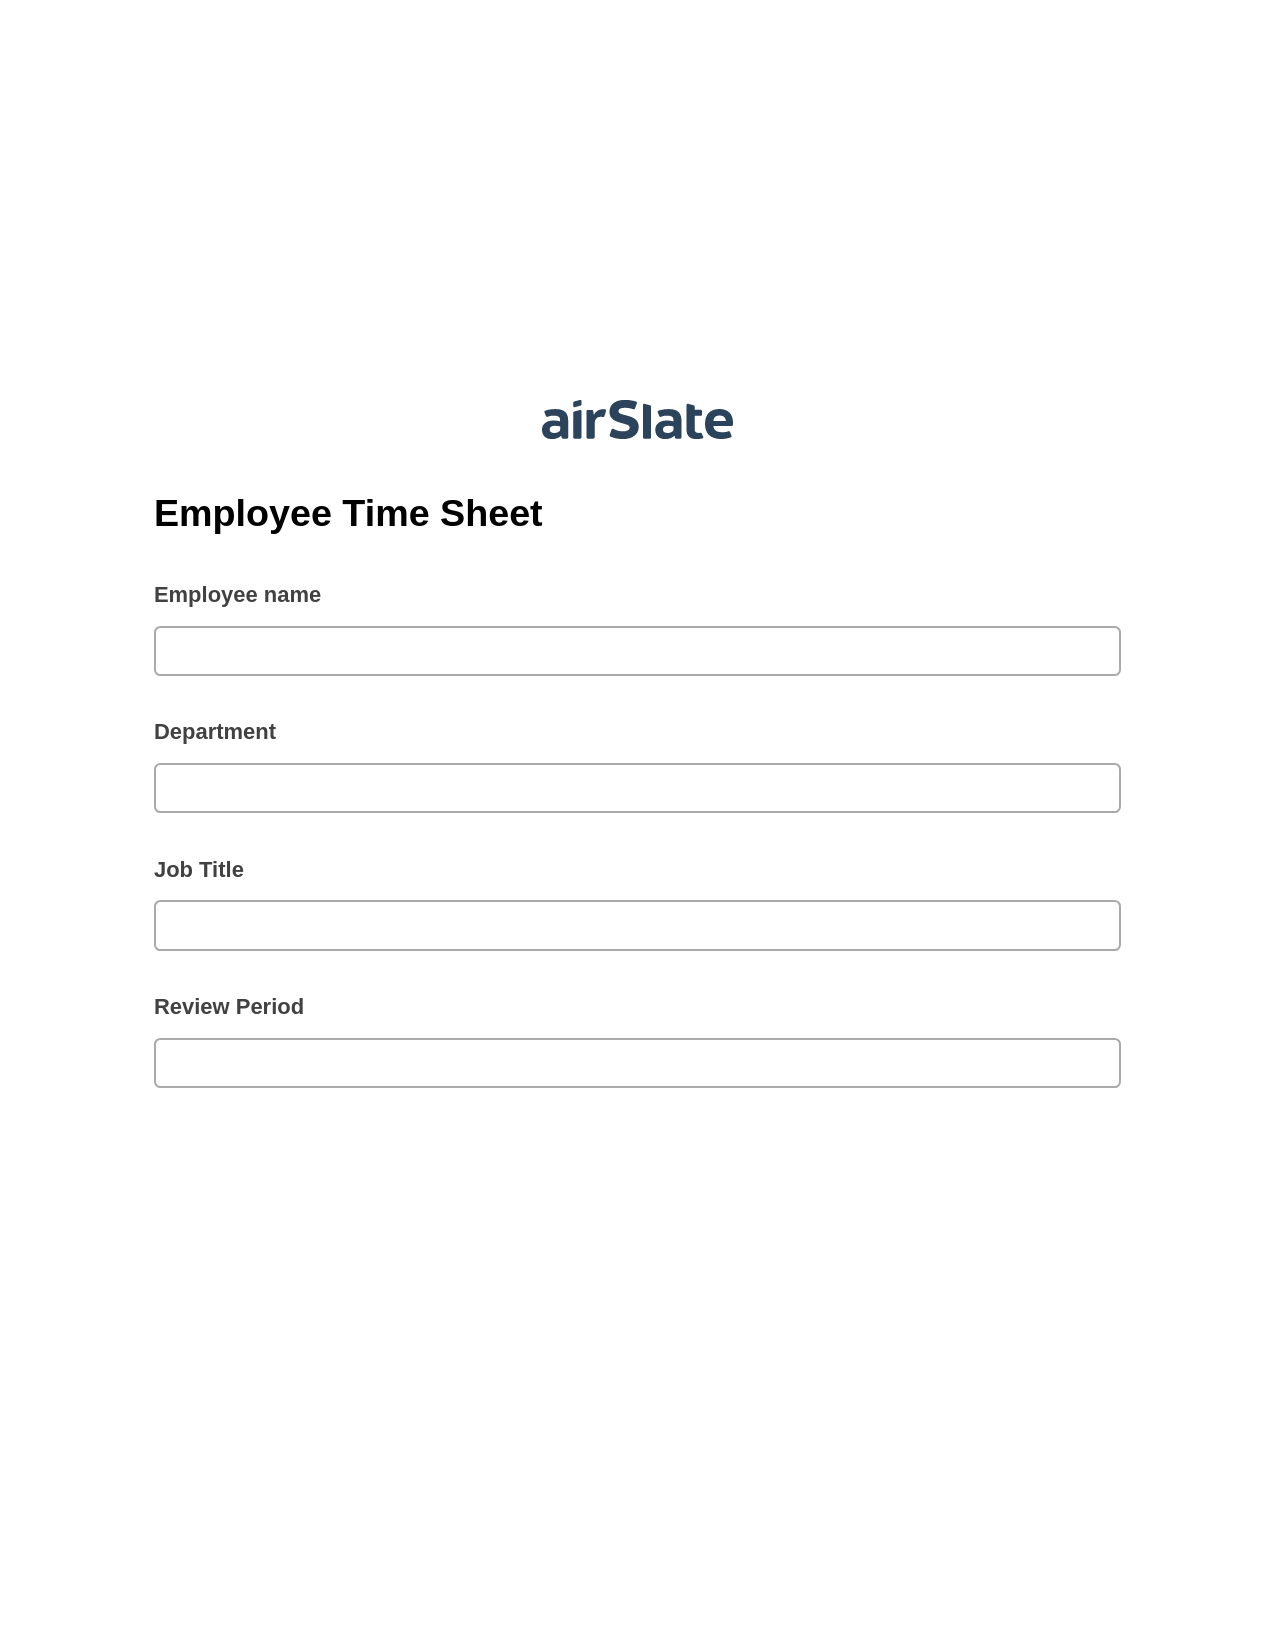 Employee Time Sheet Pre-fill Dropdowns from MySQL Bot, Update Audit Trail Bot, Archive to Box Bot